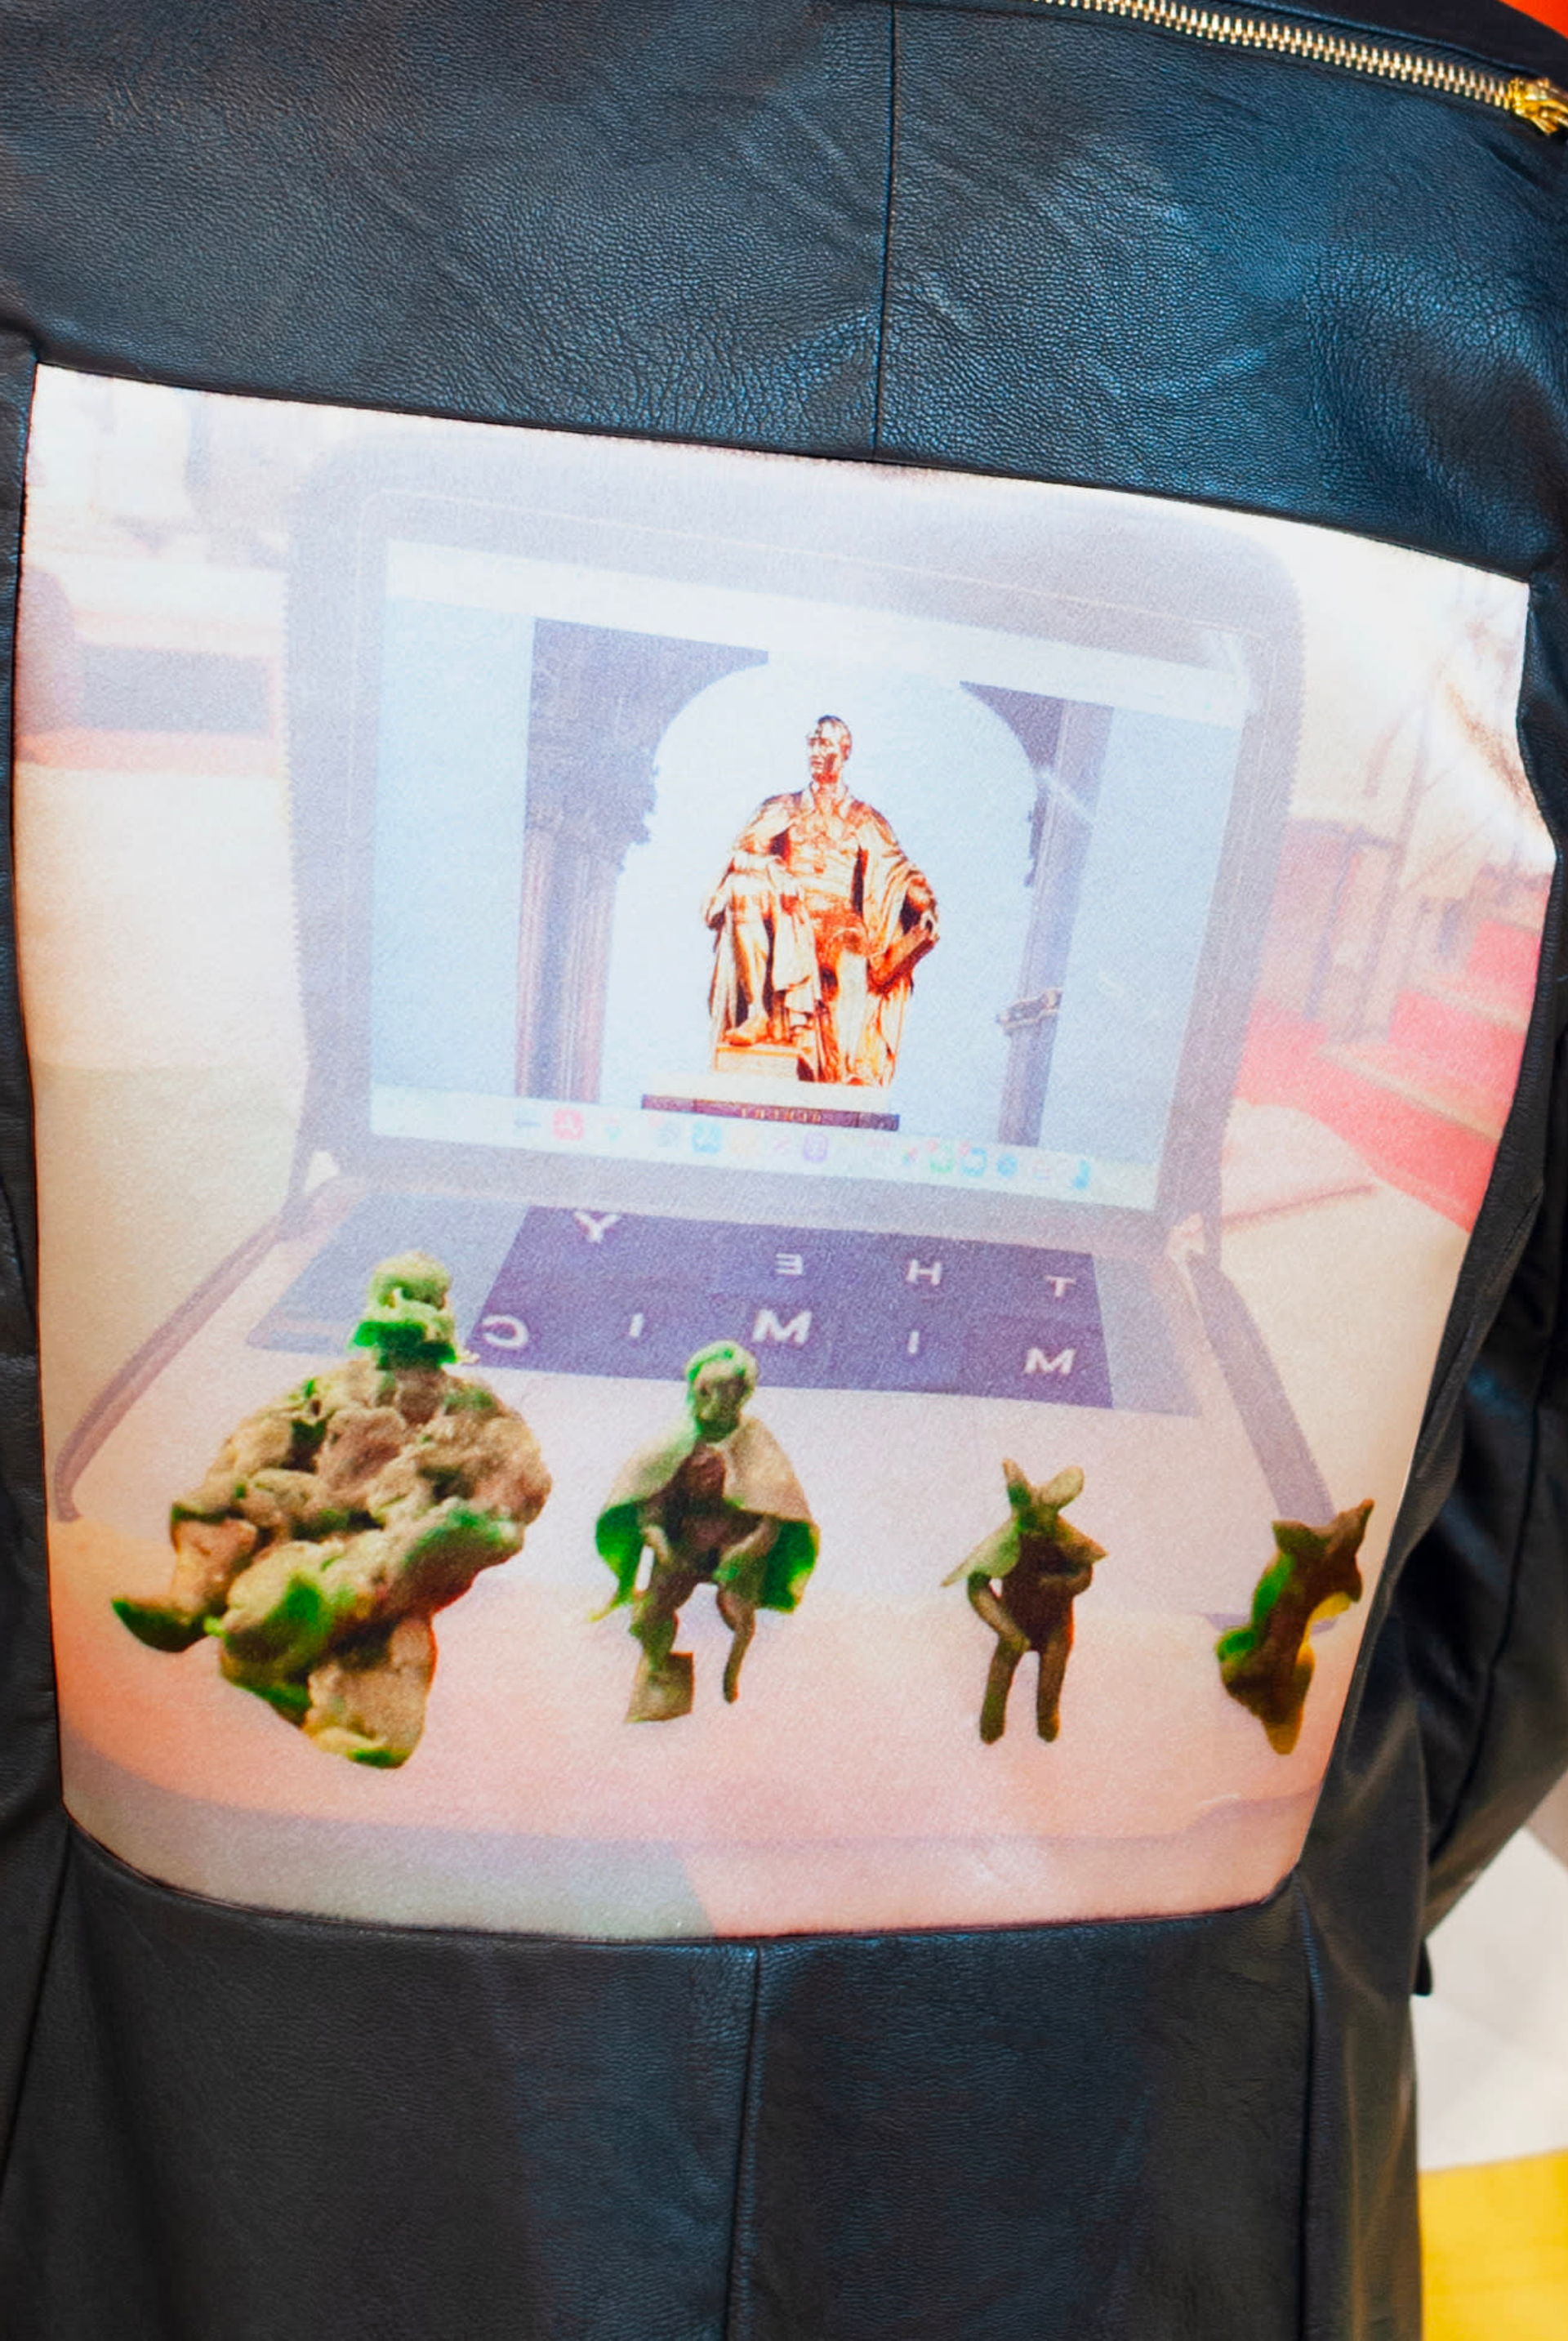 Image of, what looks like, a close-up on the back of someone wearing a black leather jacket. There is an image attached to the jacket, featuring green figures and a seated golden figure. By Franziska Windolf